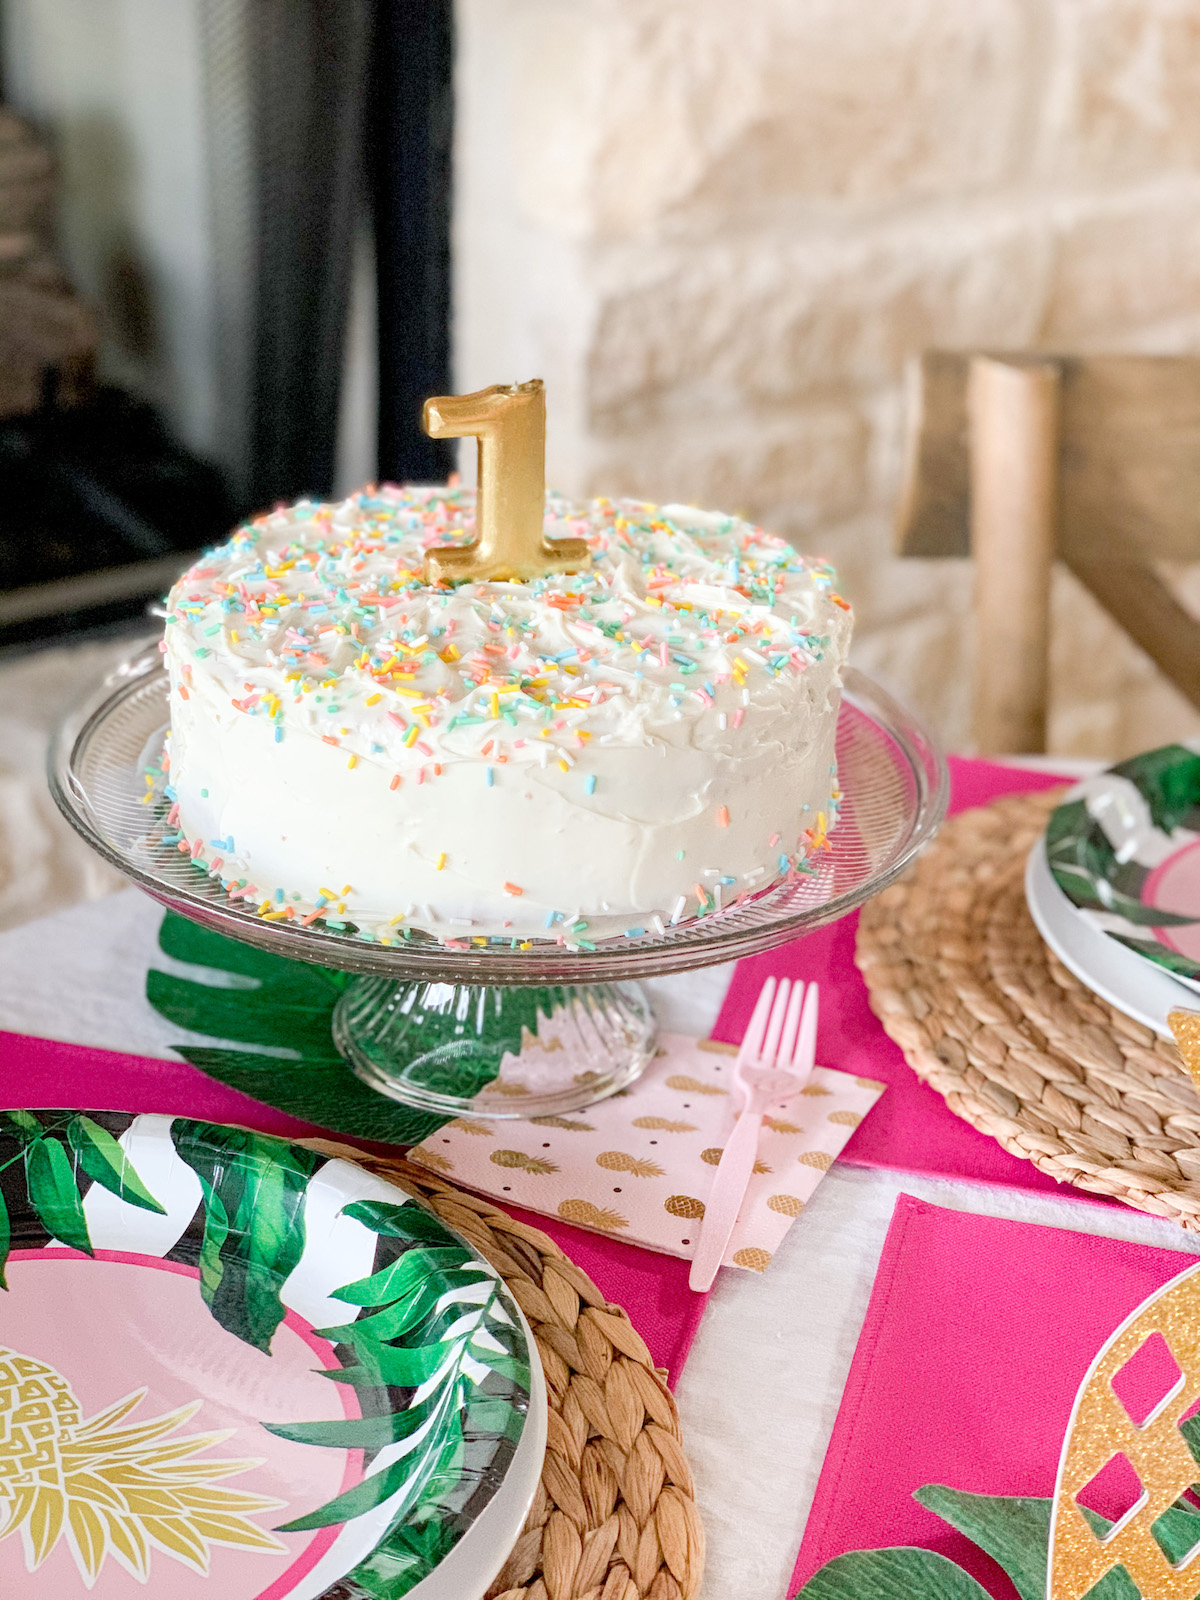 Lola's First Birthday: A Copacabana Theme | Cathedrals & Cafes Blog